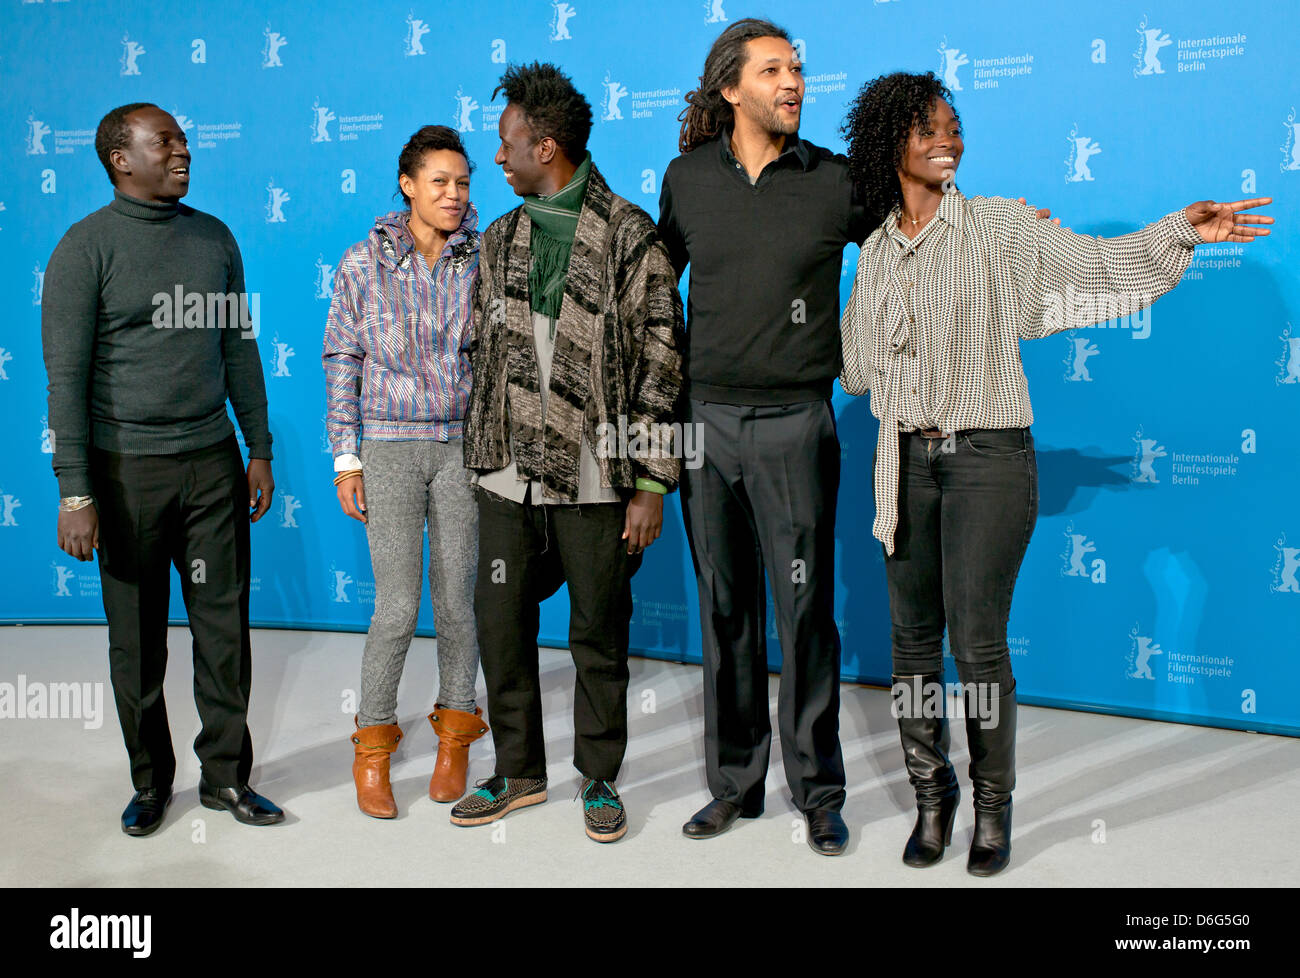 Actor Djolof M_bengue (l-r), actress Anisia Uzeyman, actor Saul Williams, director Alain Gomis and actress Aissa Maiga are posing at a photocall for the movie "Tey" (Aujourd_hui) during the 62nd Berlin International Film Festival, in Berlin, Germany, 10 February 2012. The movie is presented in competition at the 62nd Berlinale running from 09 to 19 February. Photo:Tim Brakemeier dp Stock Photo